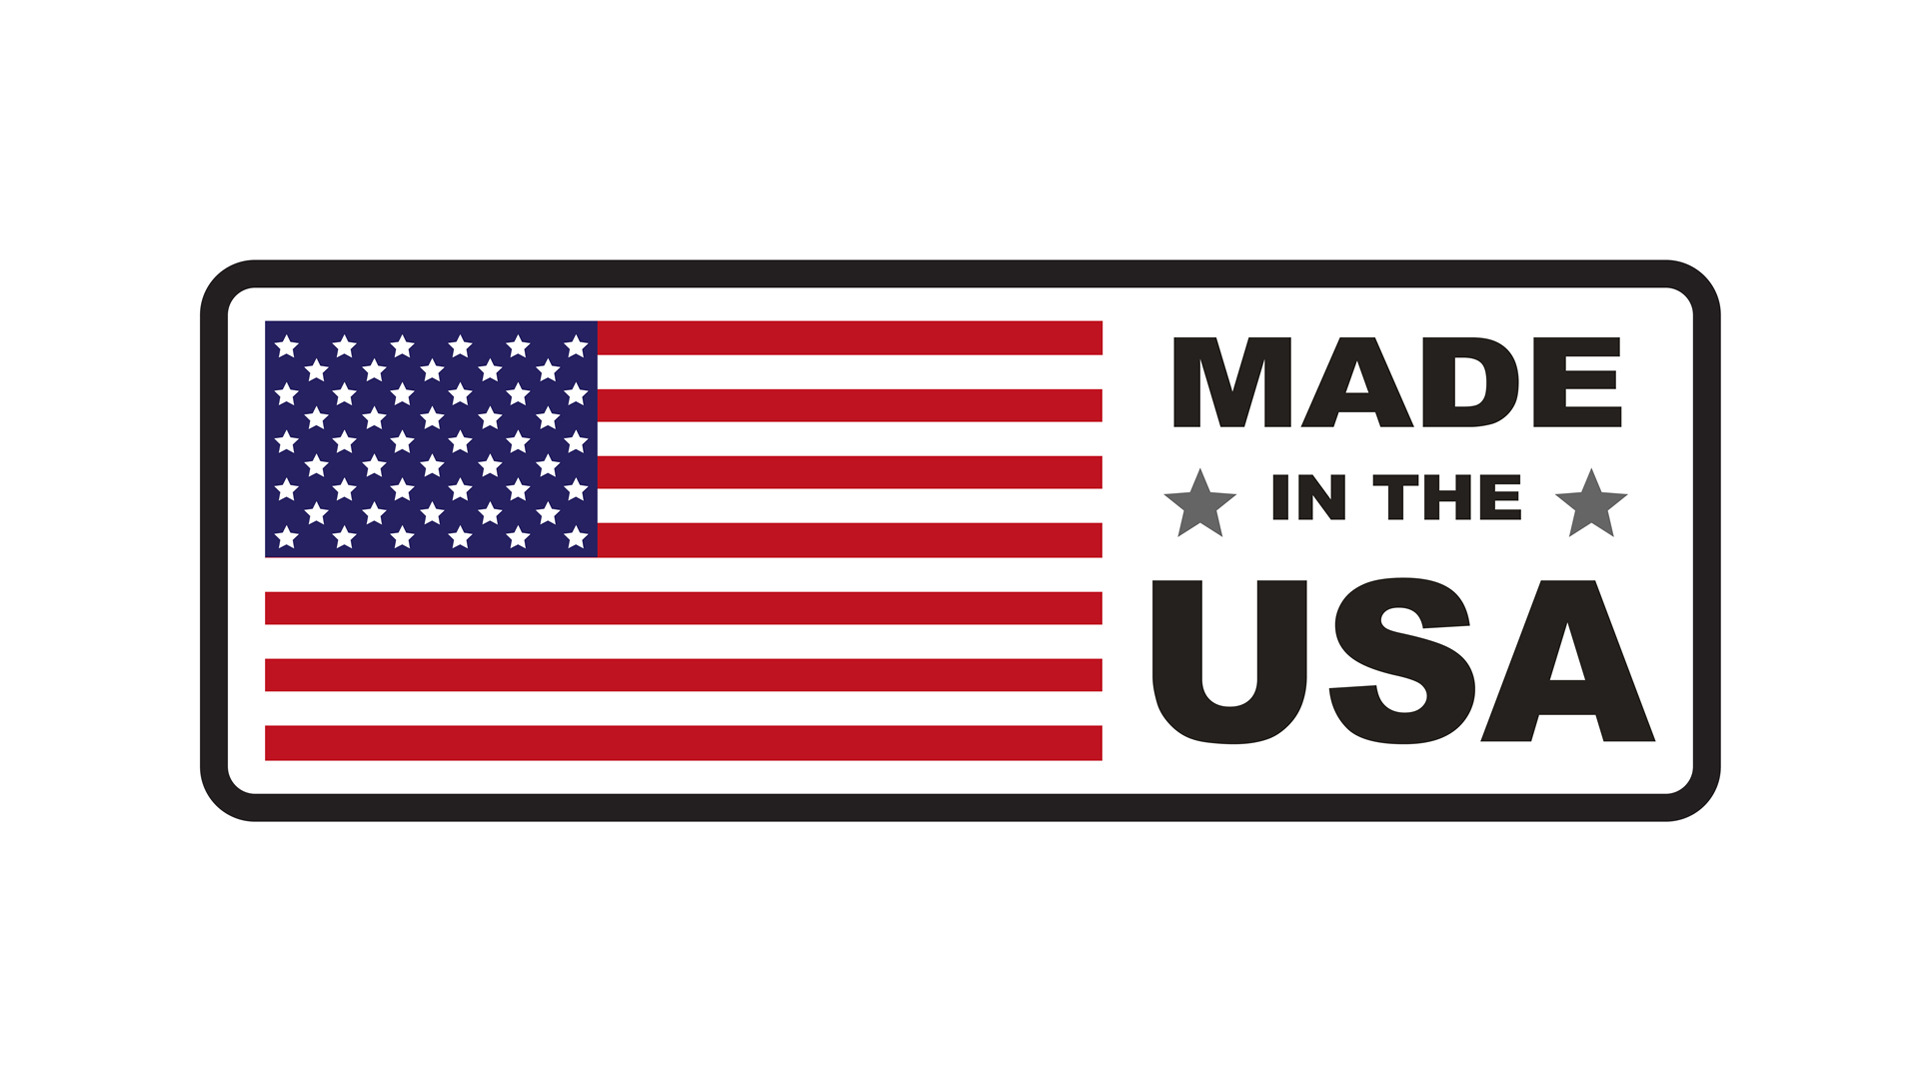 The United States of America flag with the words in black Made in USA to the right of the USA flag.